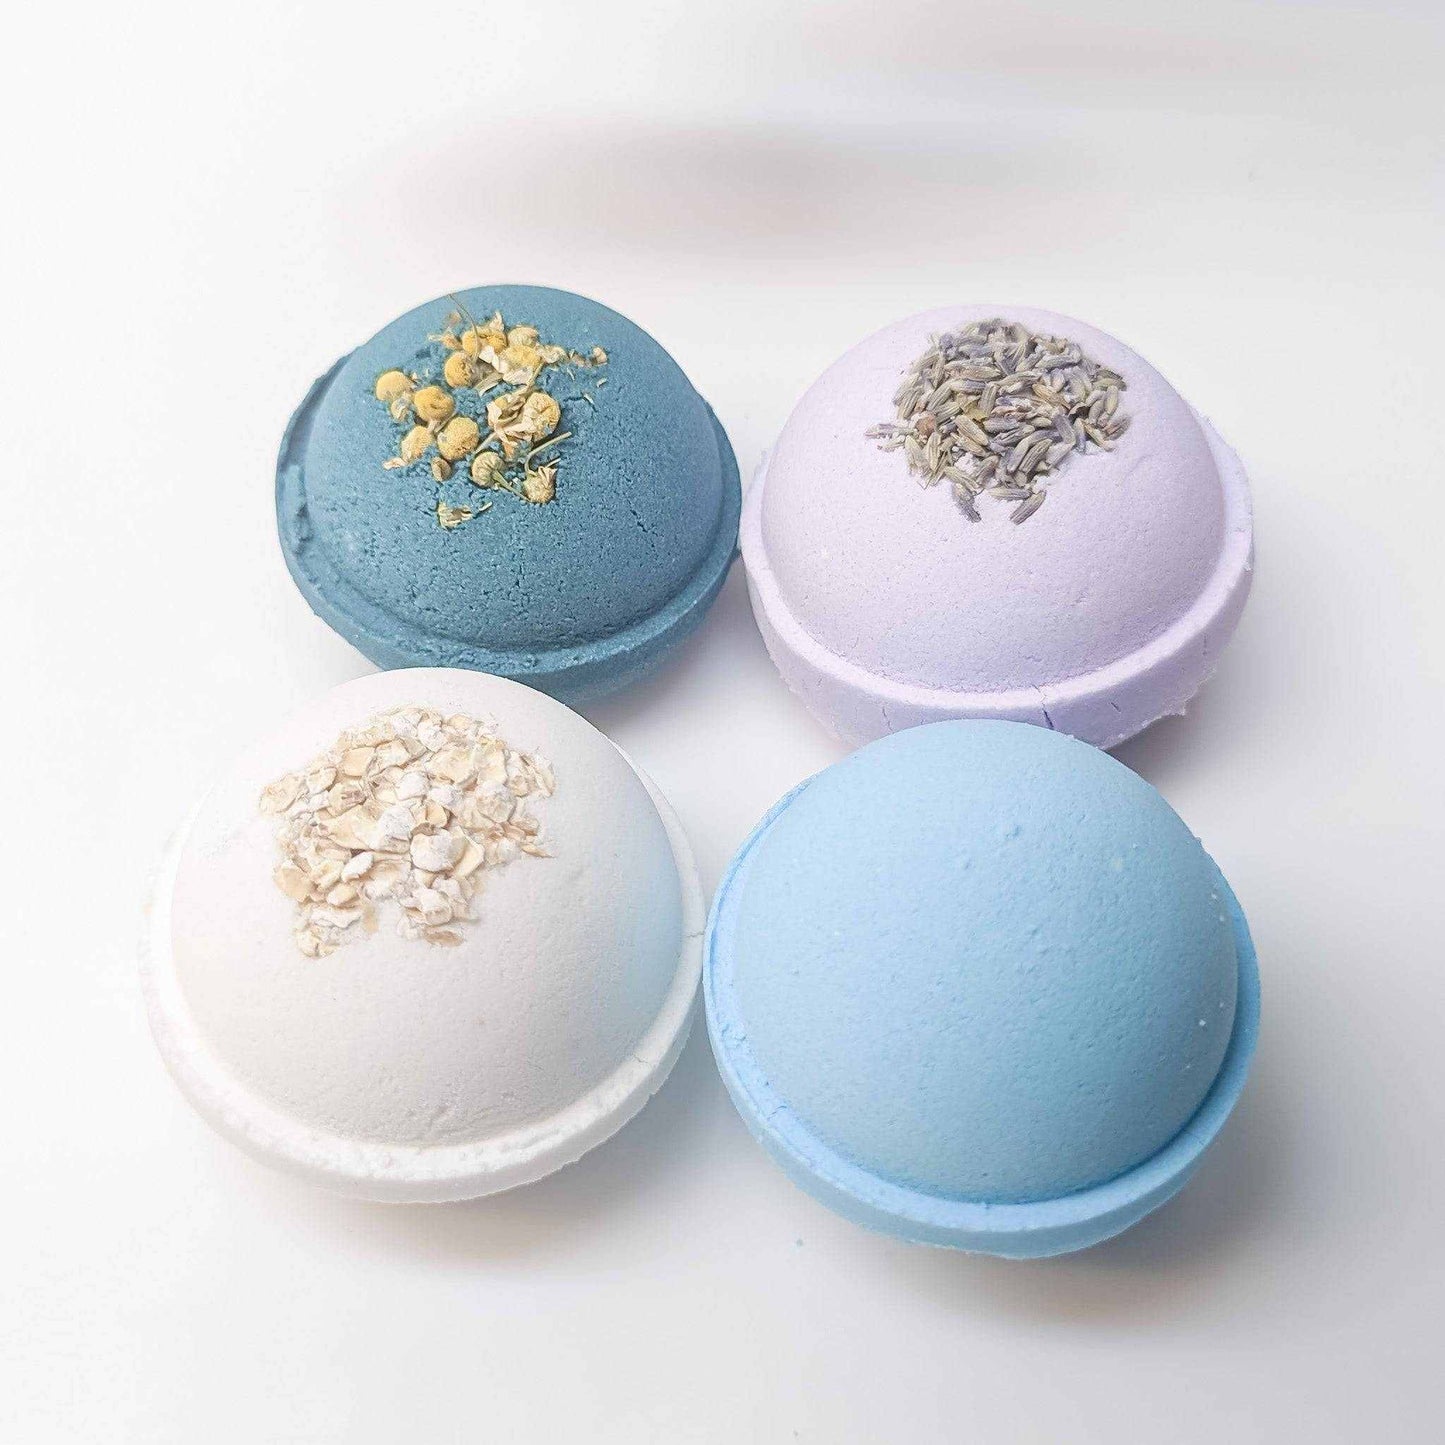 Bay Rum bath bomb, a natural, soothing bathing essential from CG Pure Wash | CG Pure Wash.